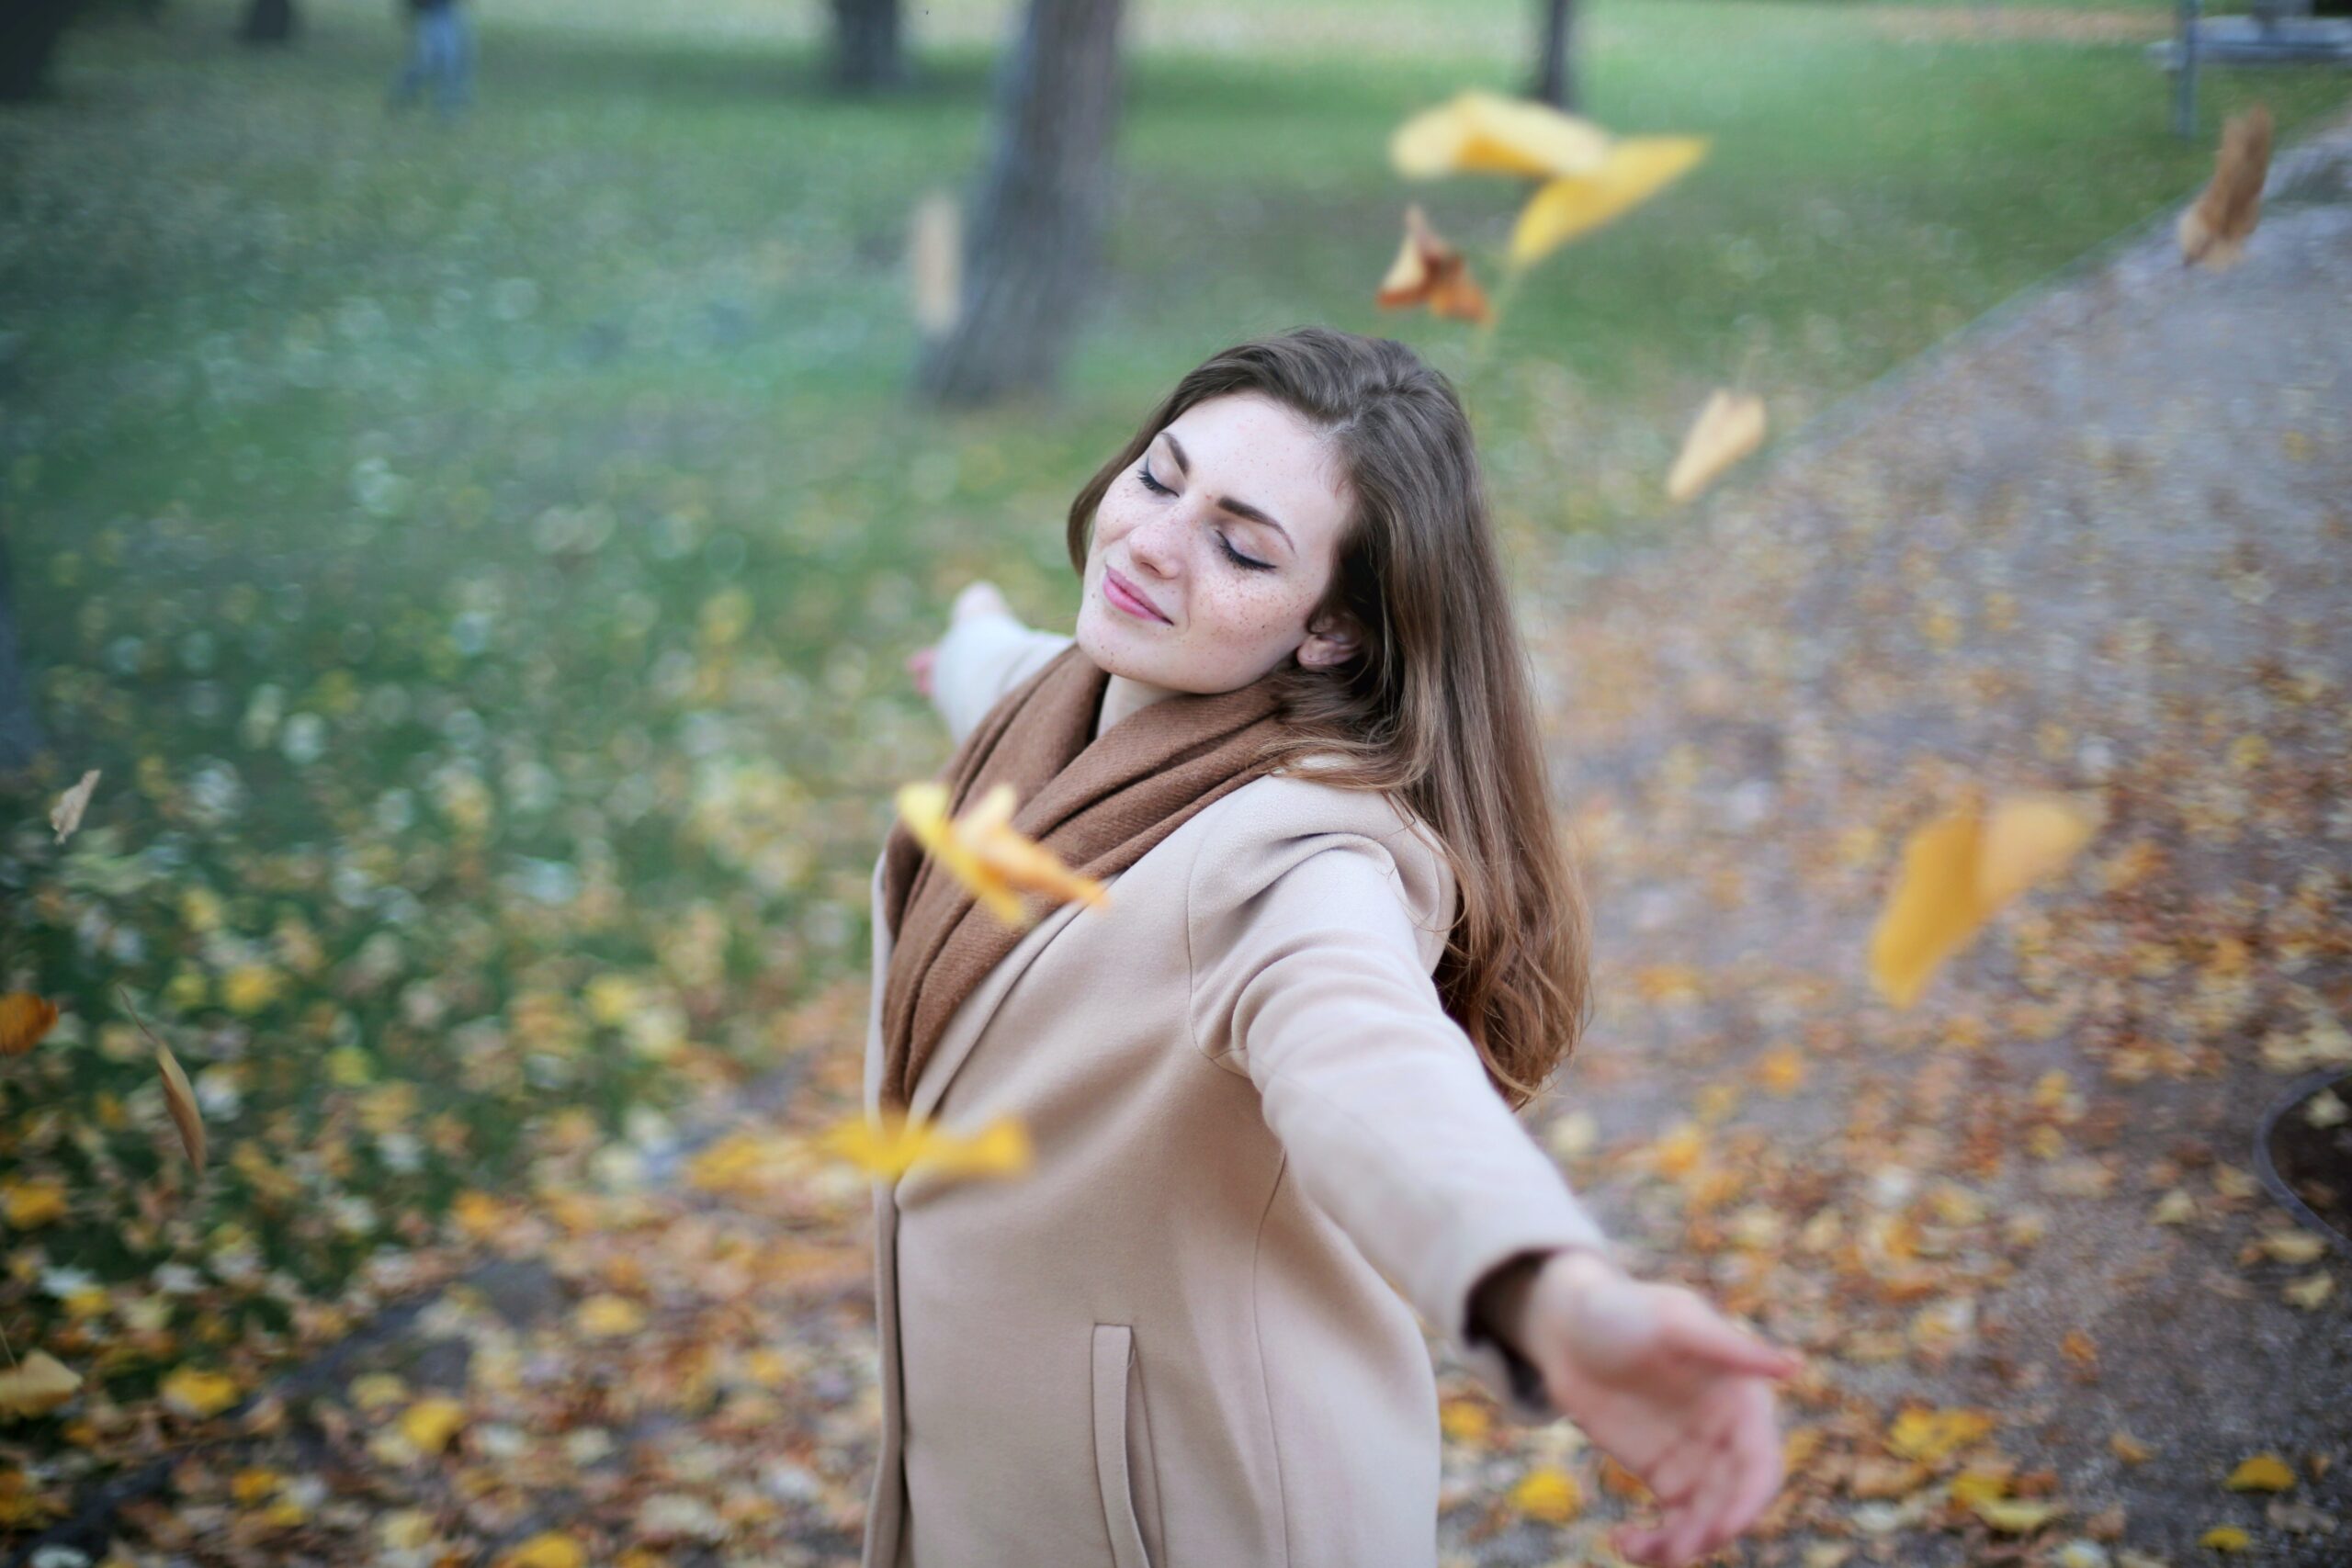 Happy woman - RumboMag - 10 Simple Habits for Achieving Success and Happiness